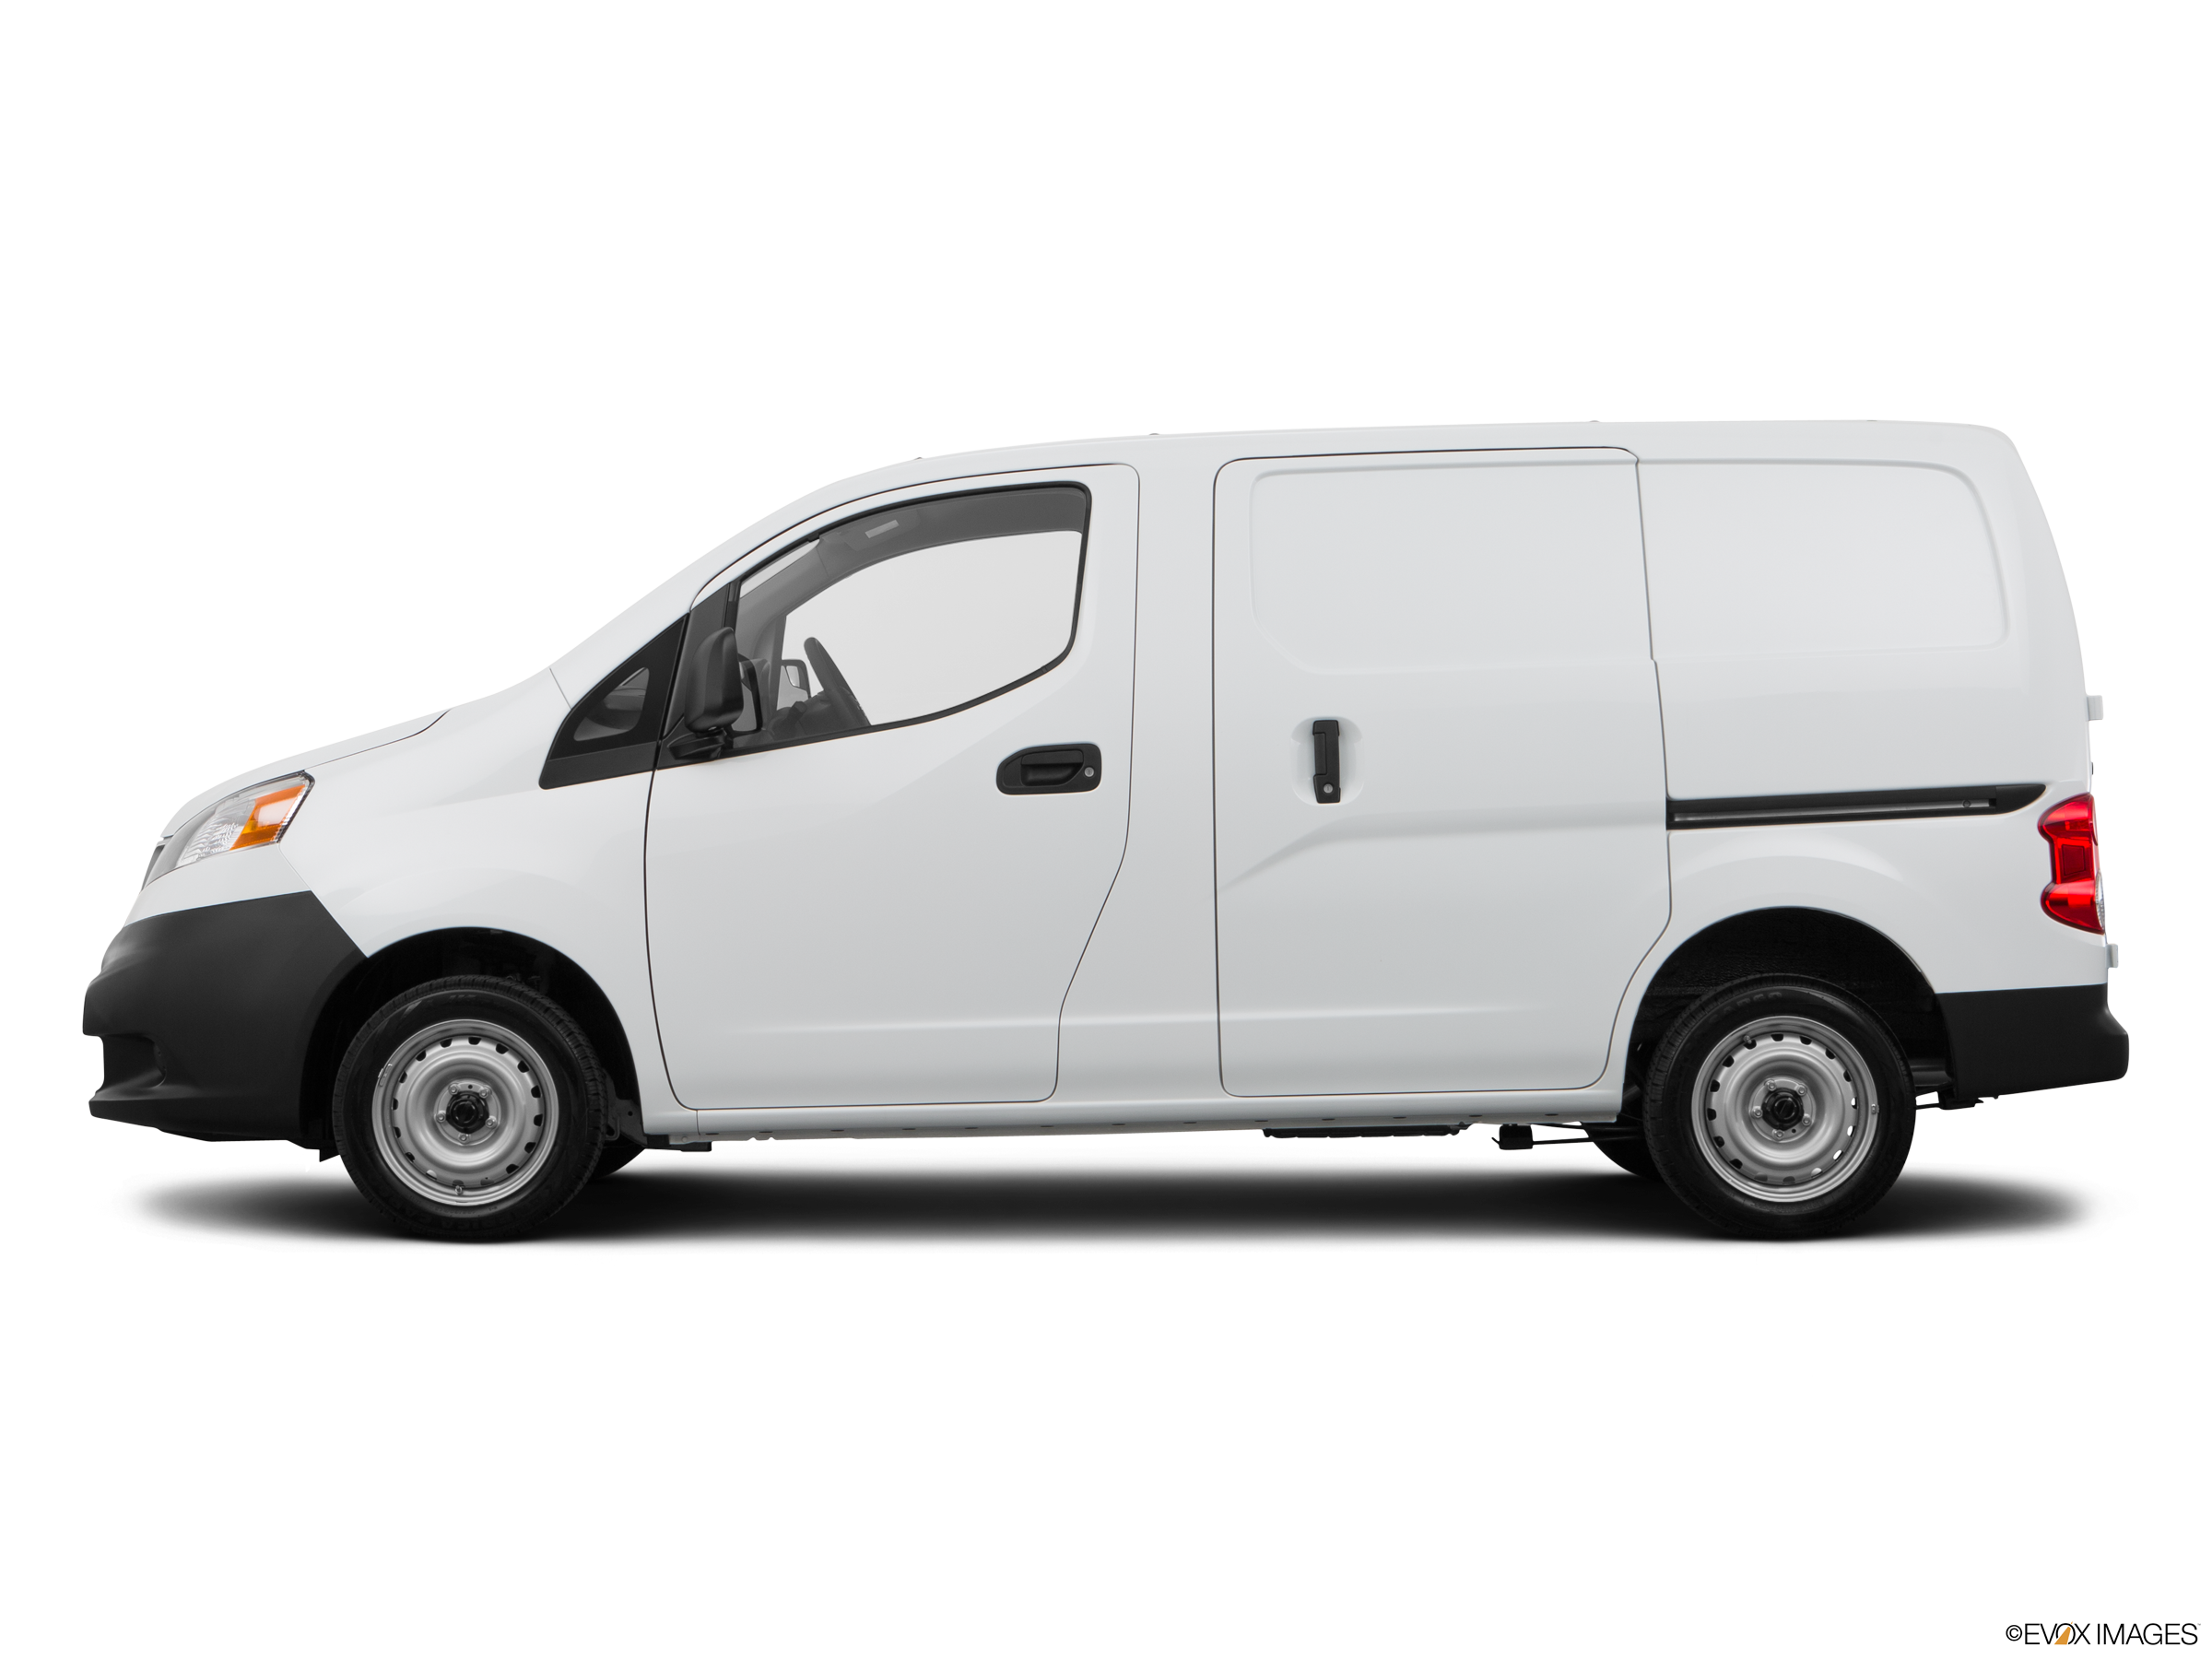 2015 Nissan NV200 - News, reviews, picture galleries and videos